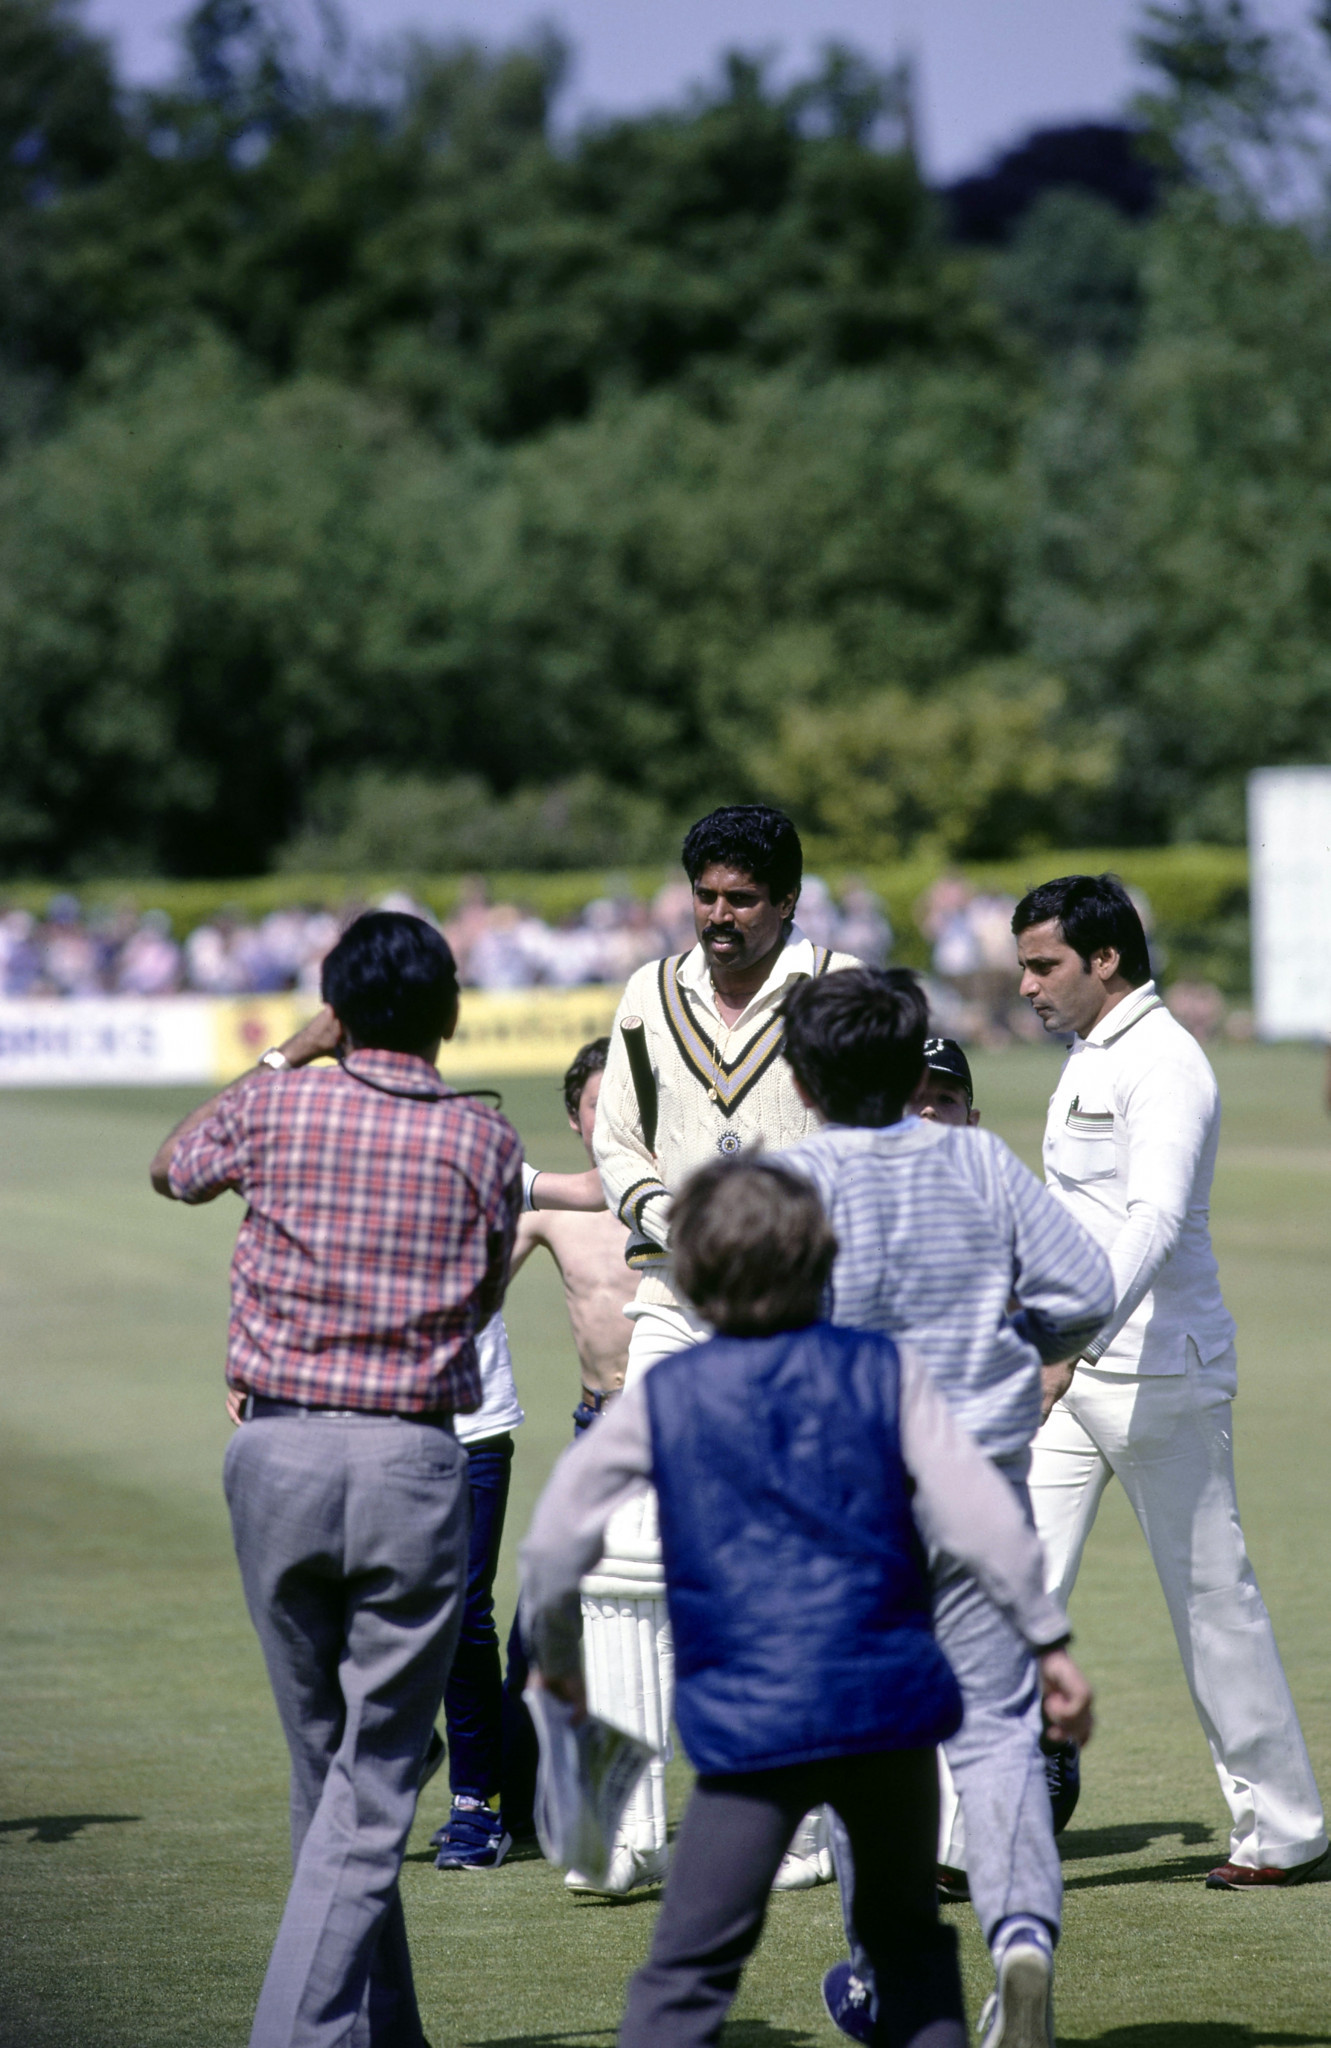 There were a few Indian fans in Tunbridge Wells to congratulate Kapil Dev after his 175 ©Getty Images